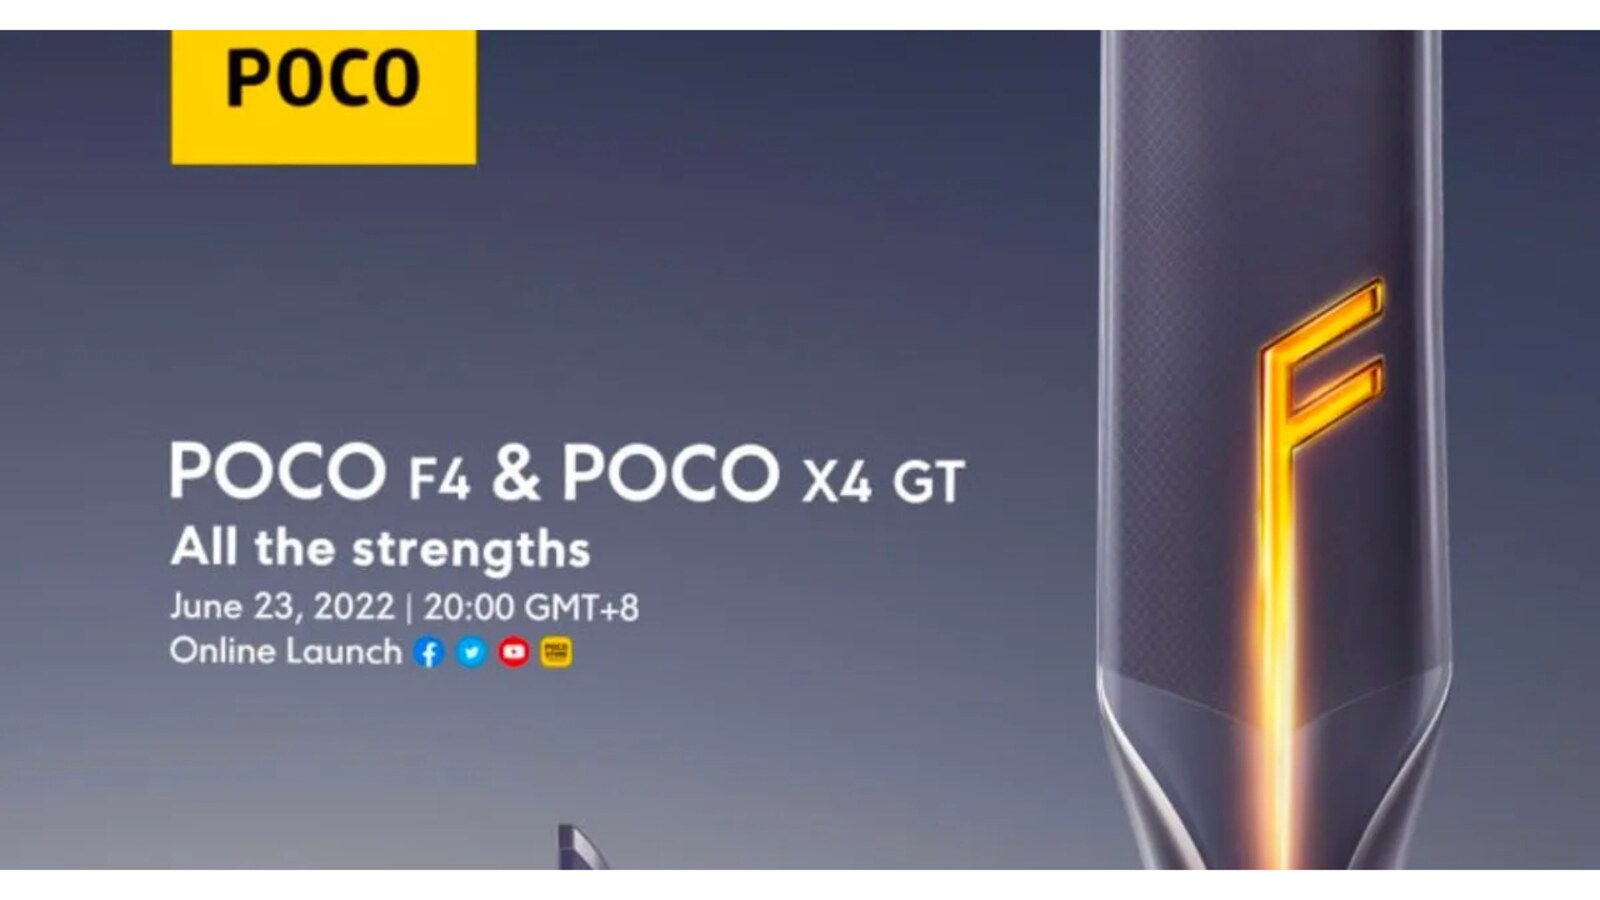 Poco F4 5G, Poco X4 GT global launch this week - Here is